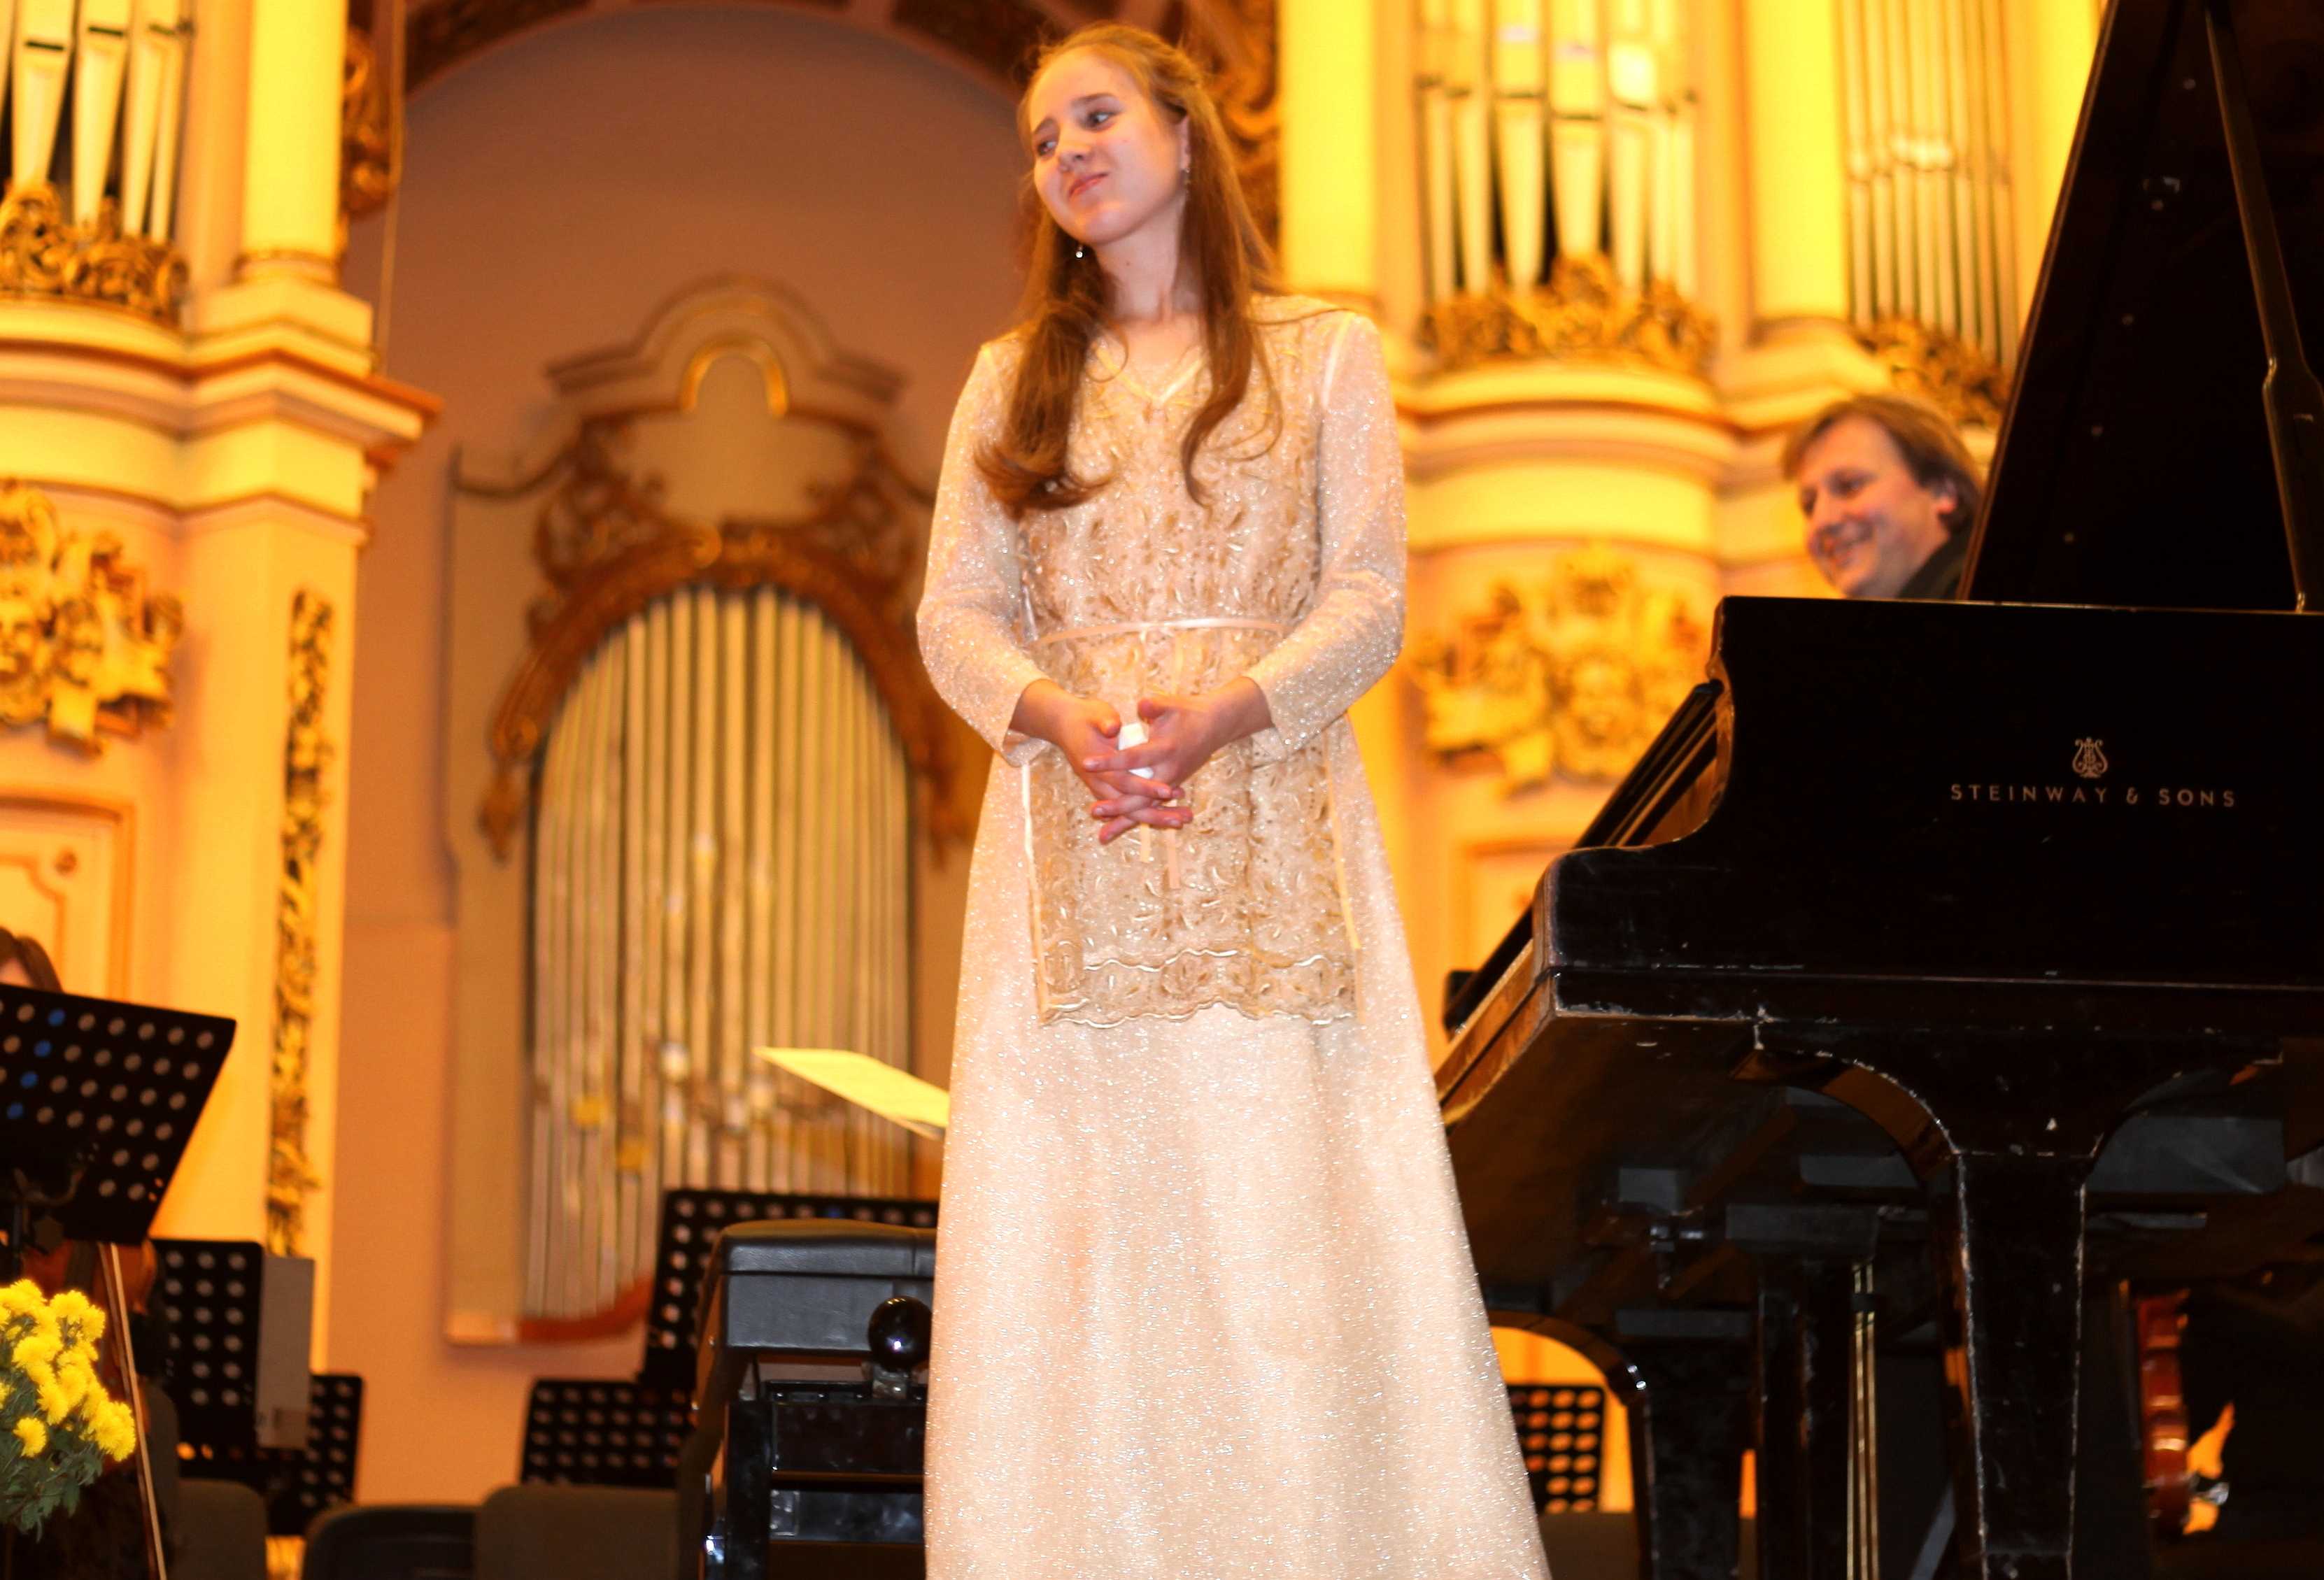 a pianist girl in a philharmonic after the performance, photo 1